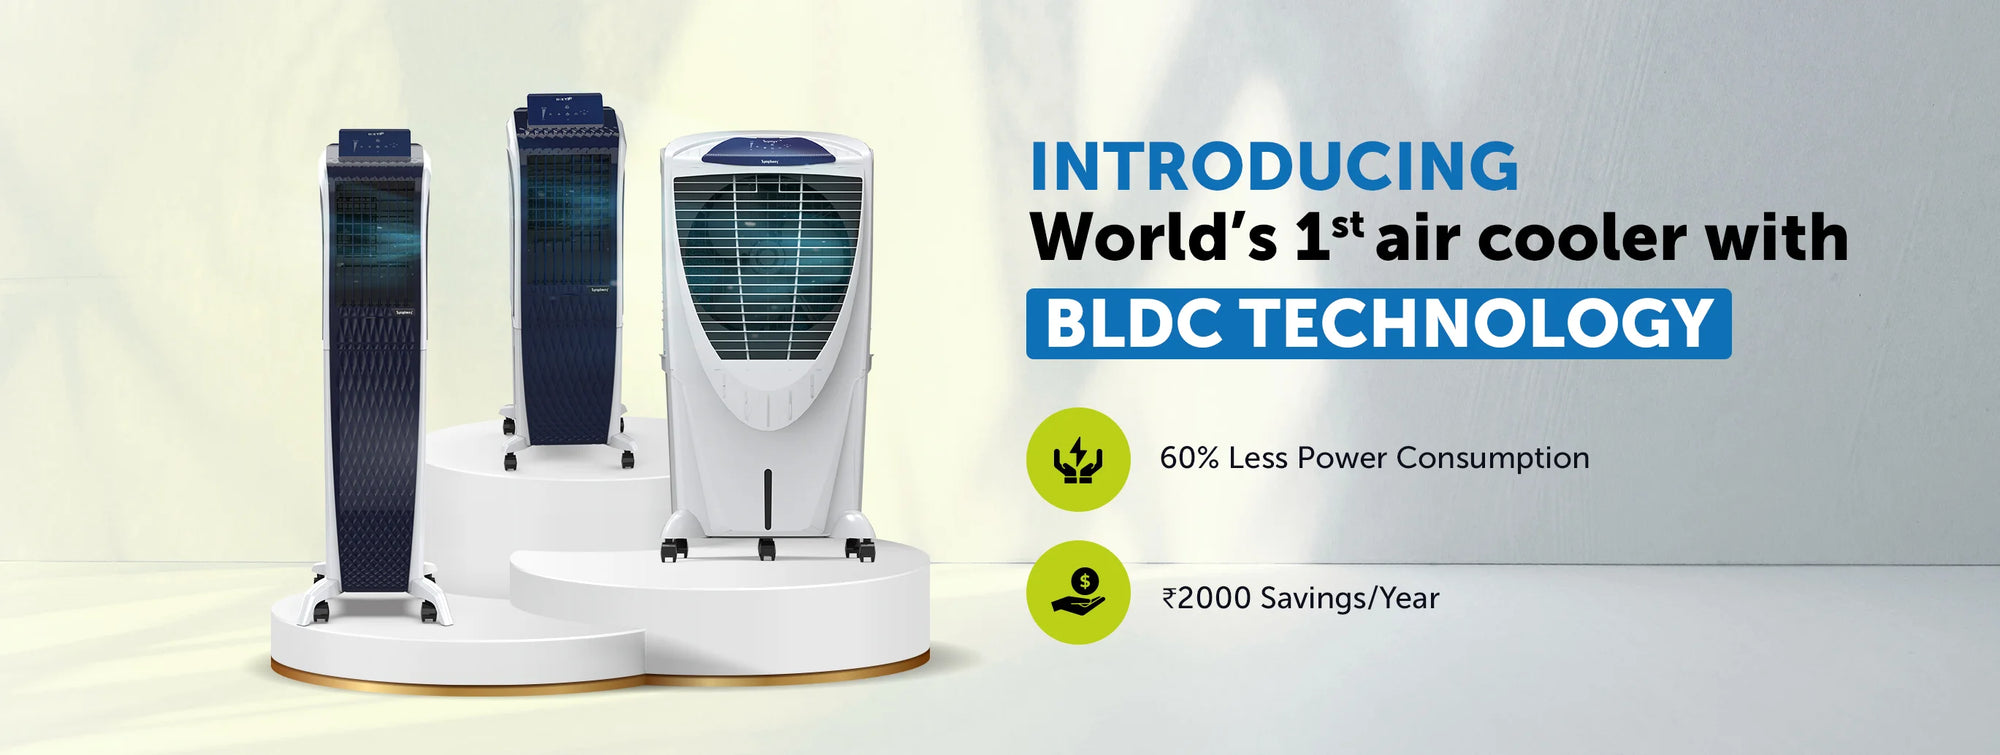 Symphony Air Cooler with BLDC Technology 